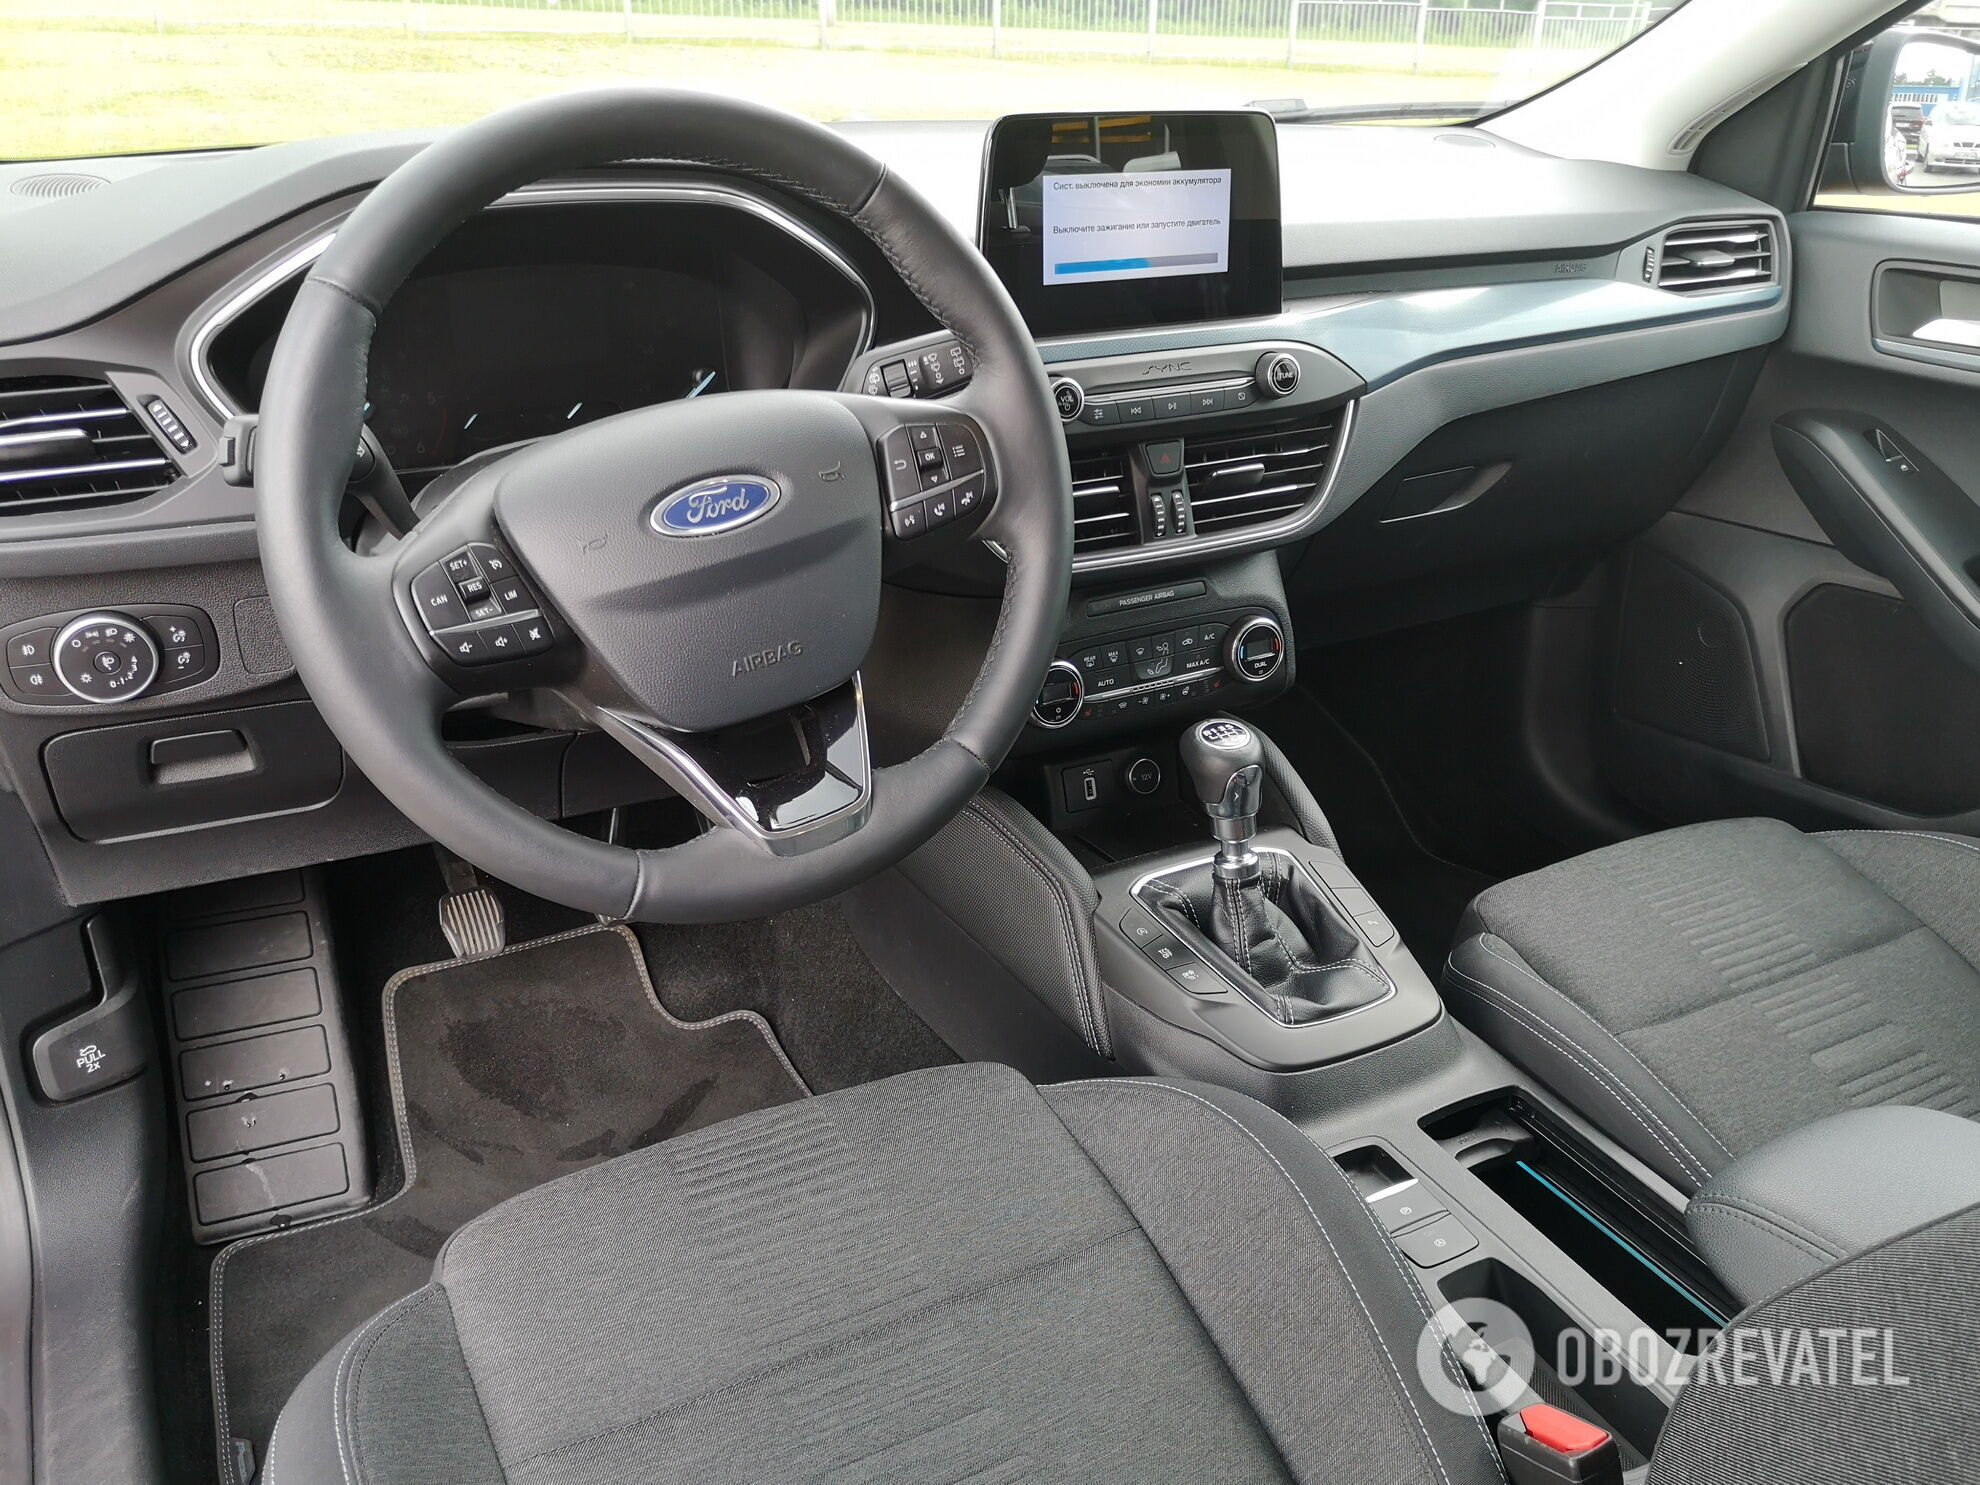 2020 Ford Focus Active. Фото: